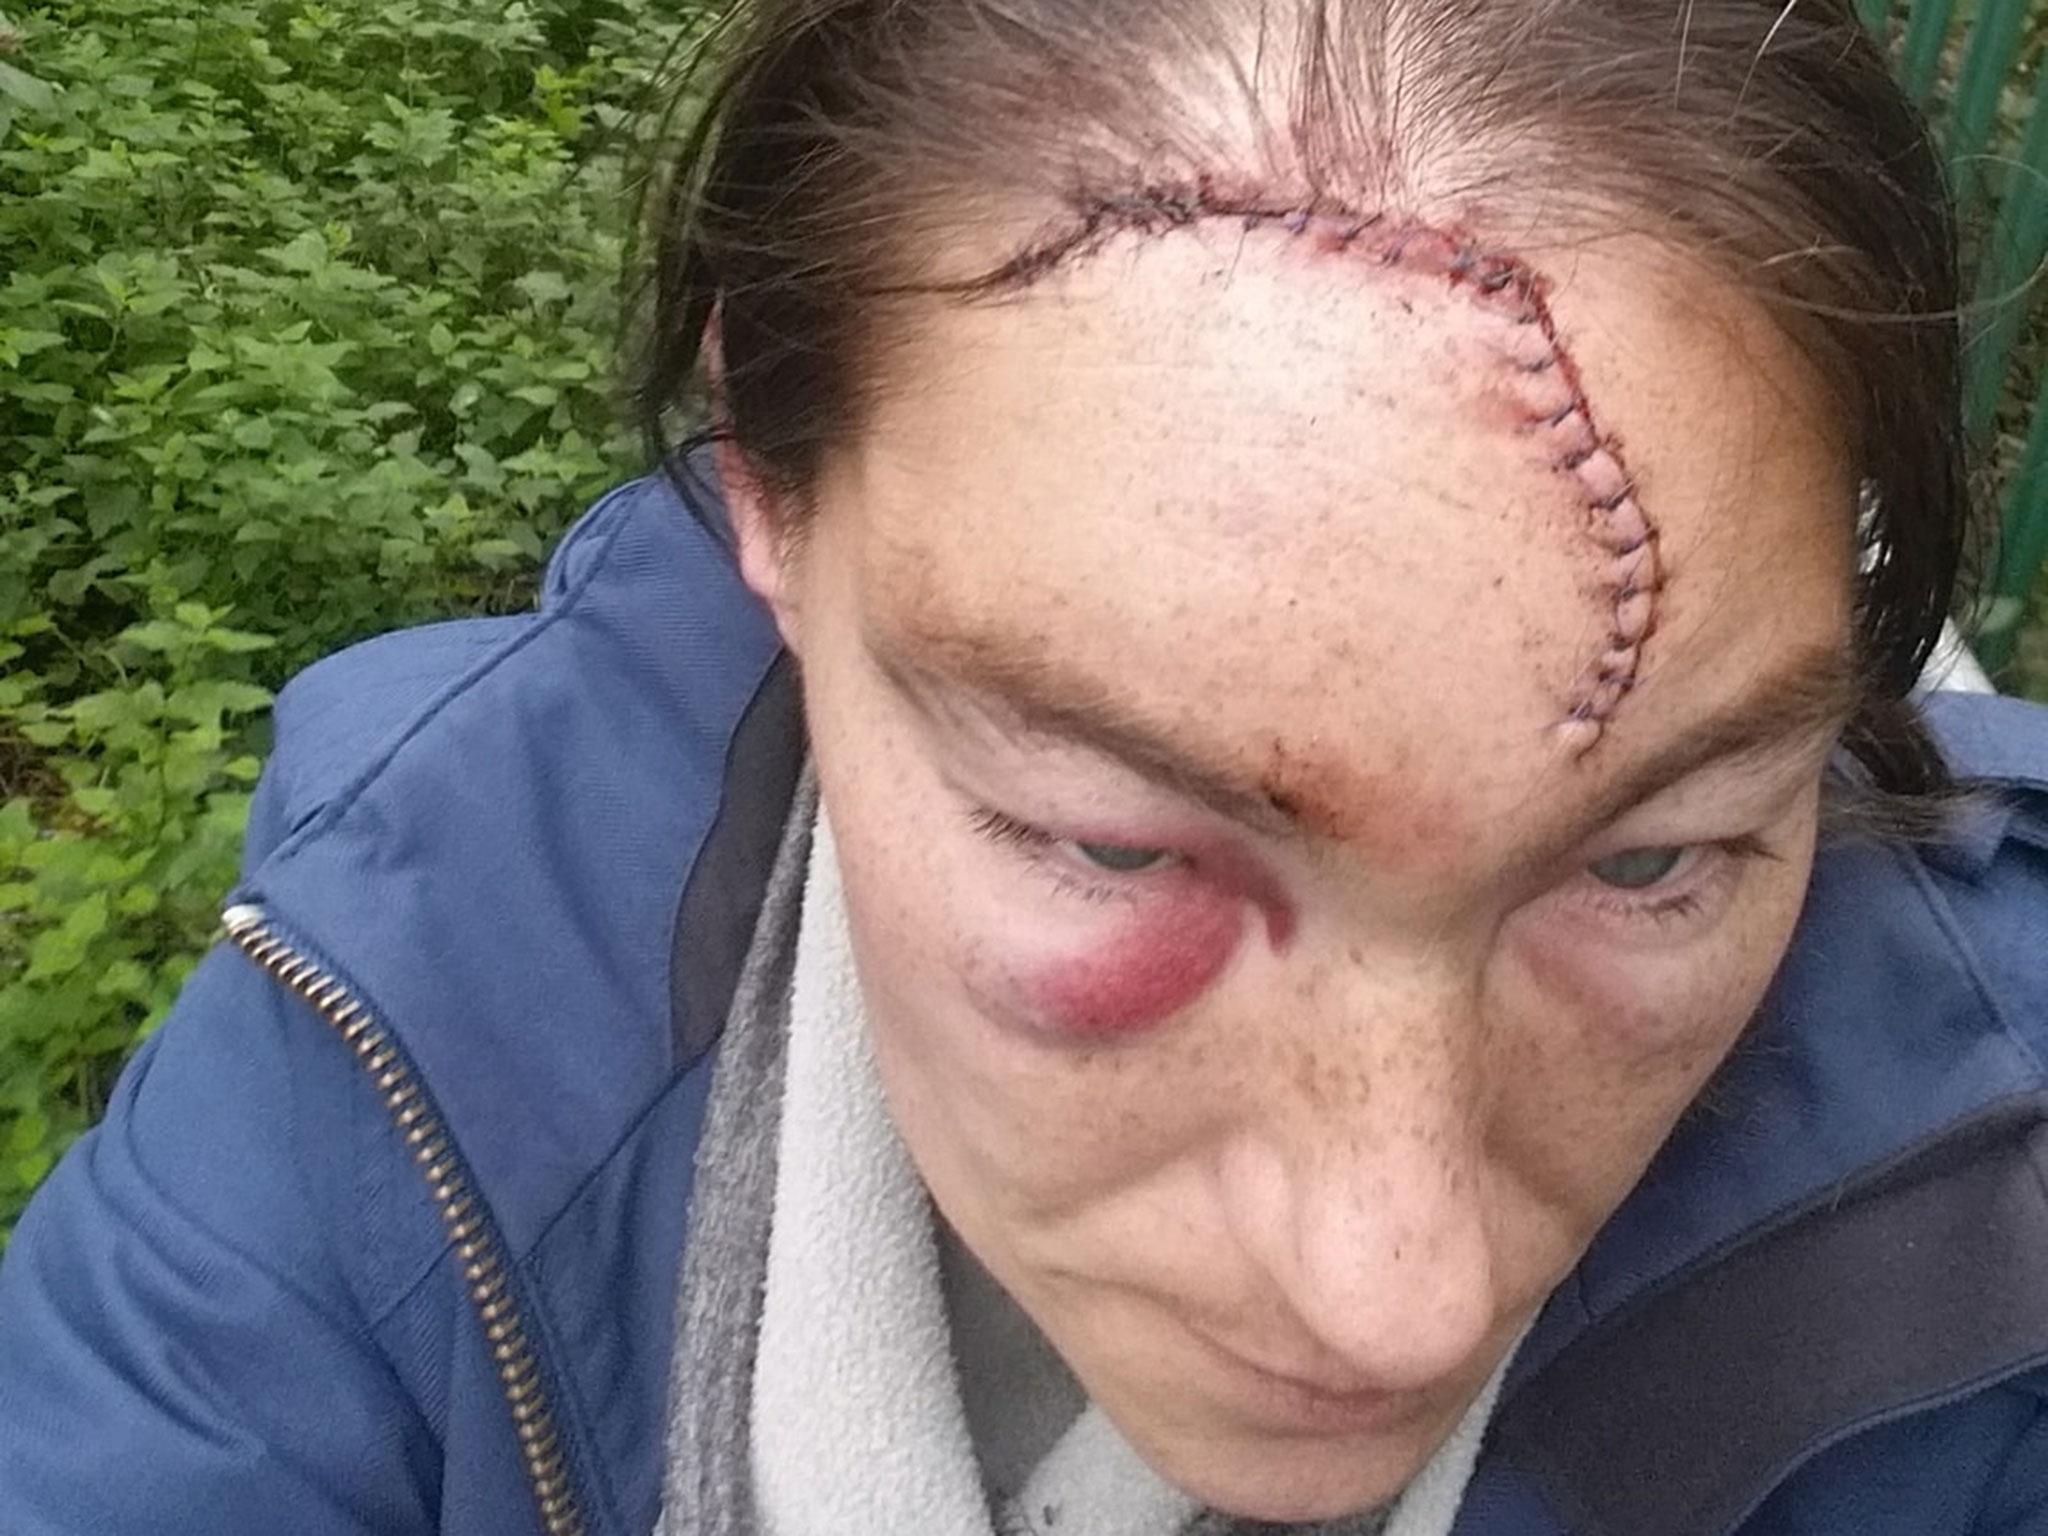 Nikki Hurst, 32, shared pictures of her injuries from the attack on Facebook